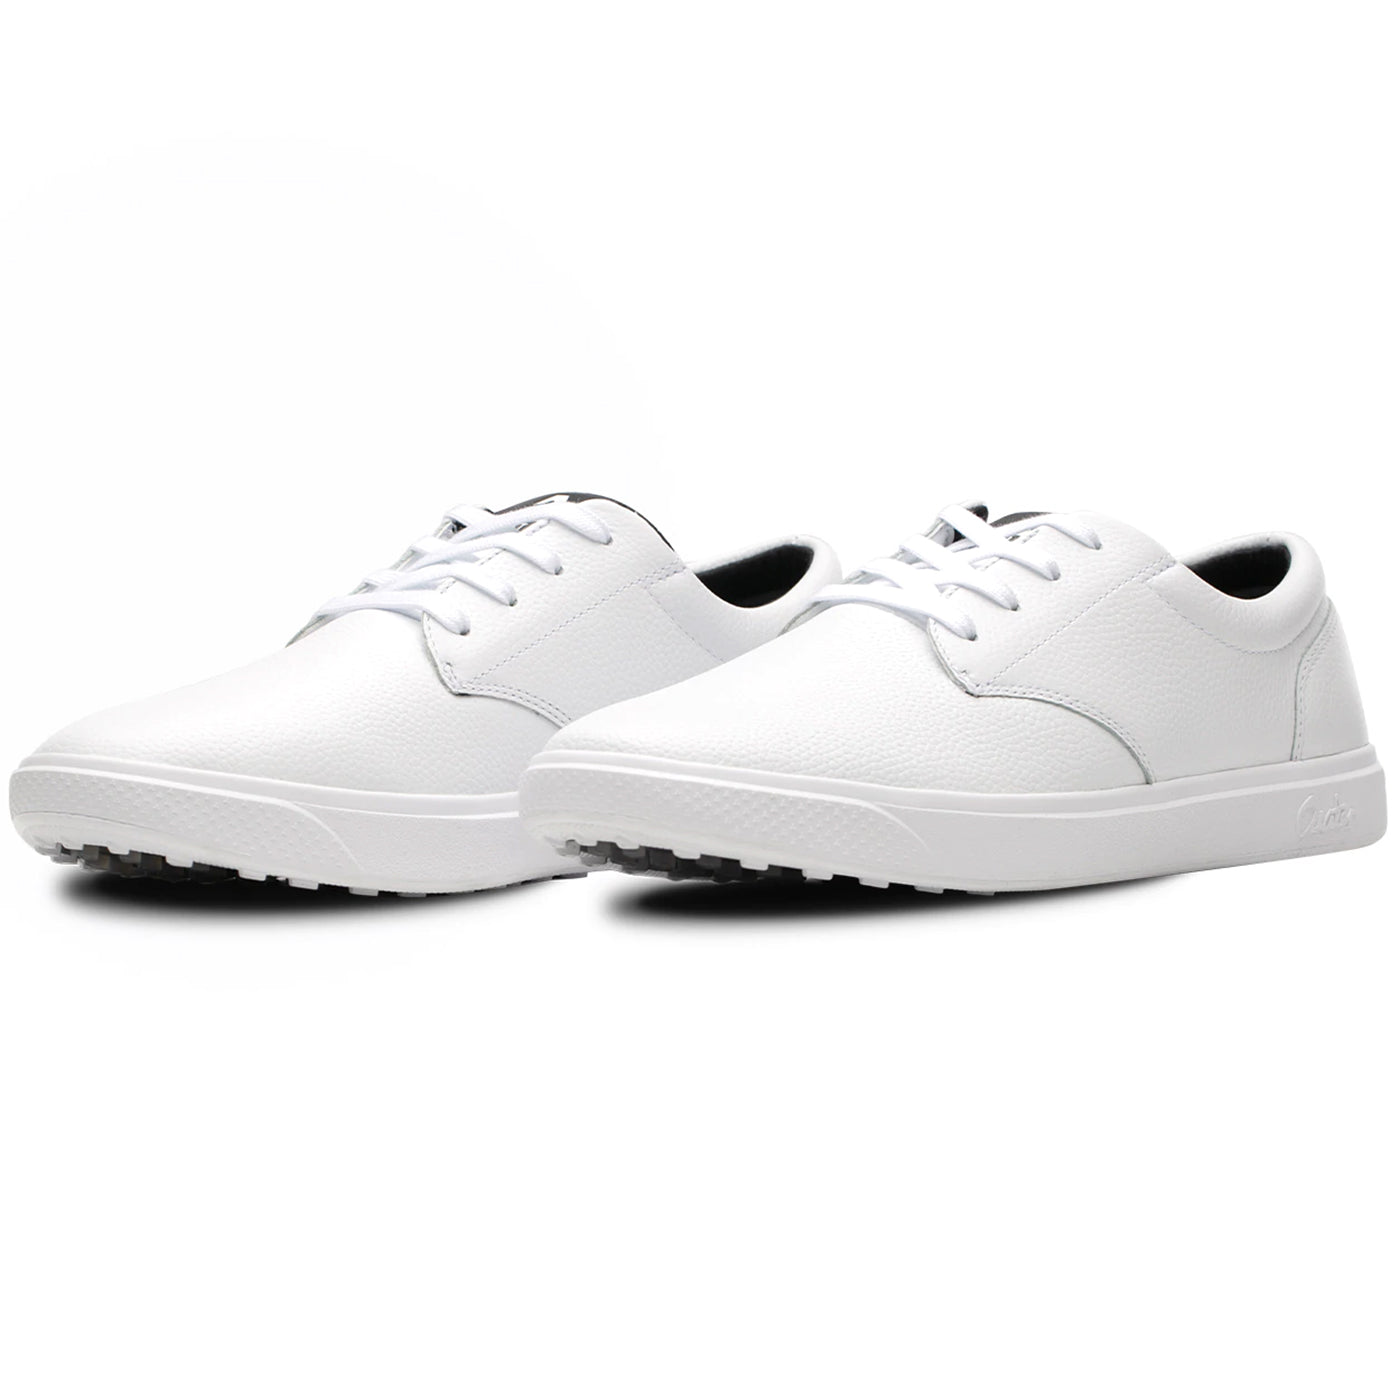 Cuater The Wildcard Leather Golf Shoes